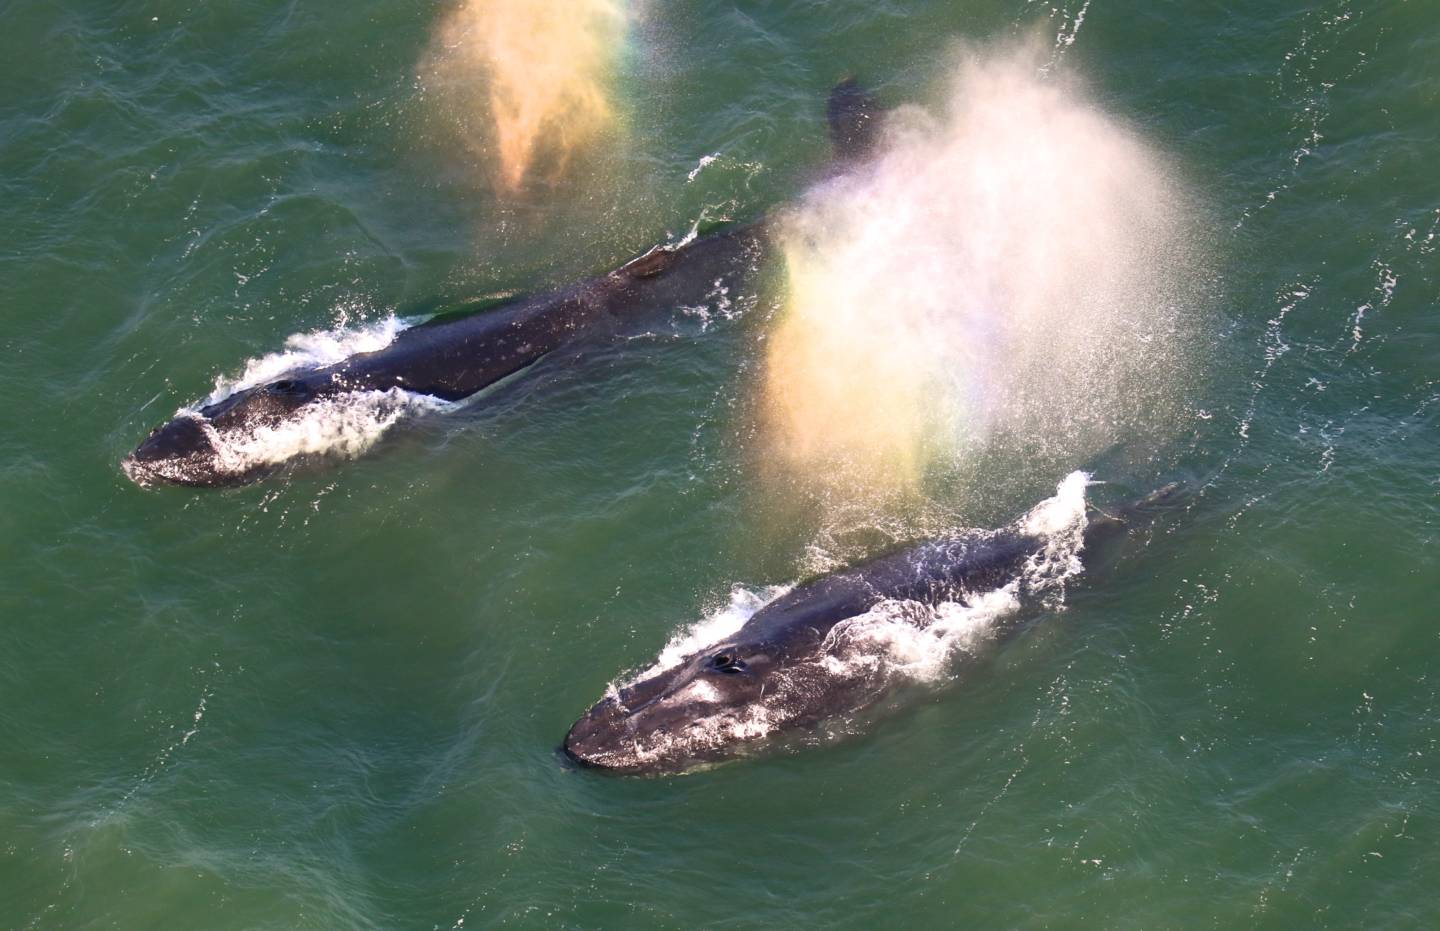 Two humpbacks whales sighted inside the bay on May 15. Bill Keener/Golden Gate Cetacean Research